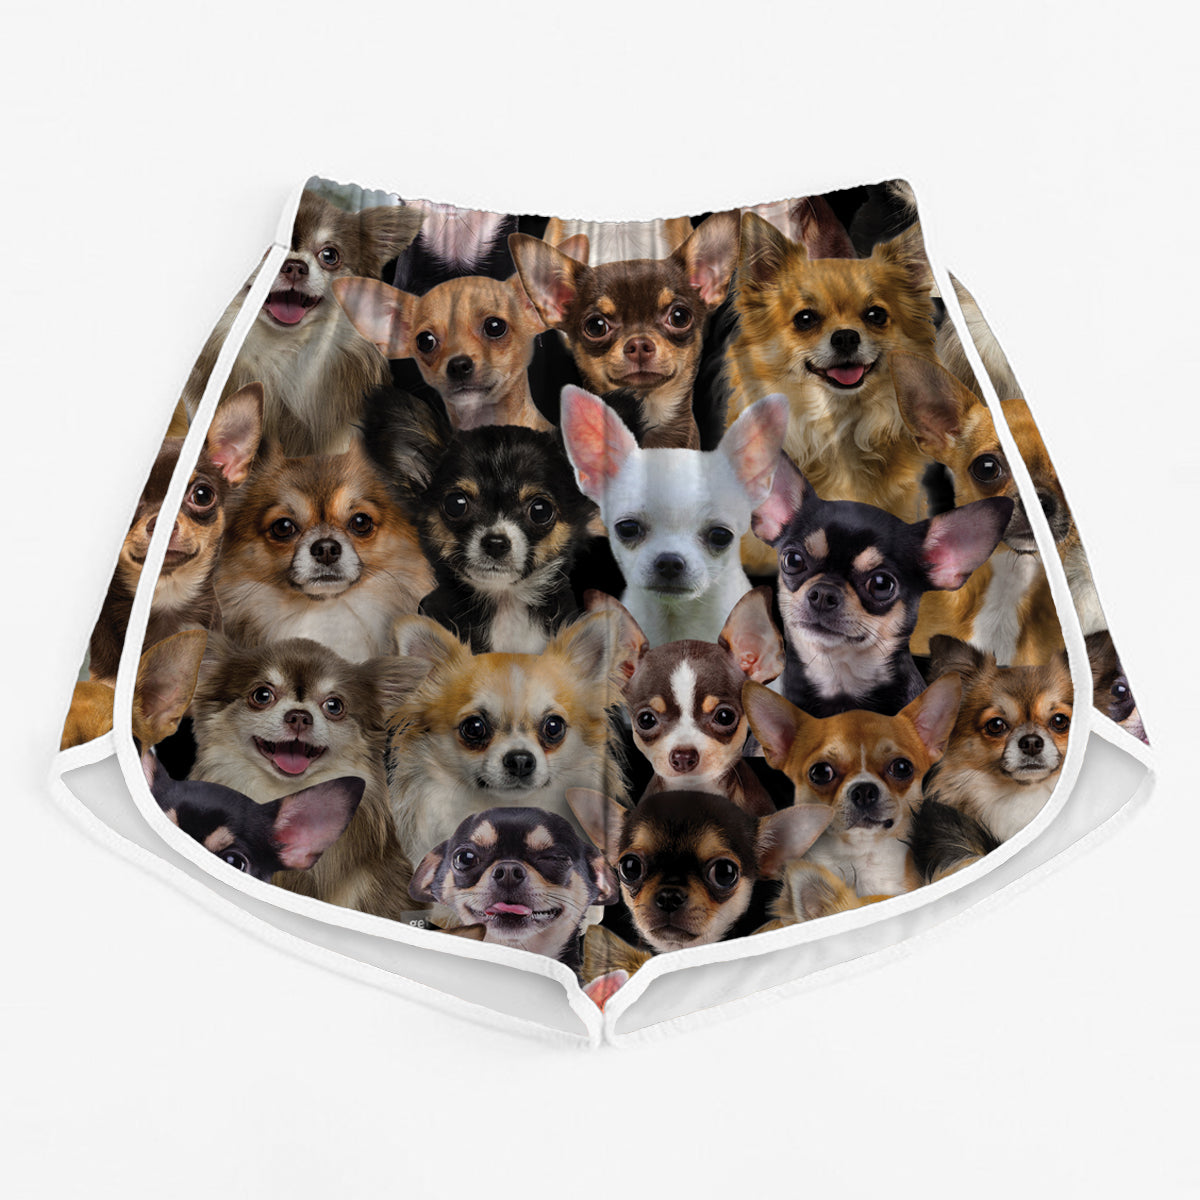 You Will Have A Bunch Of Chihuahuas - Women's Running Shorts V1